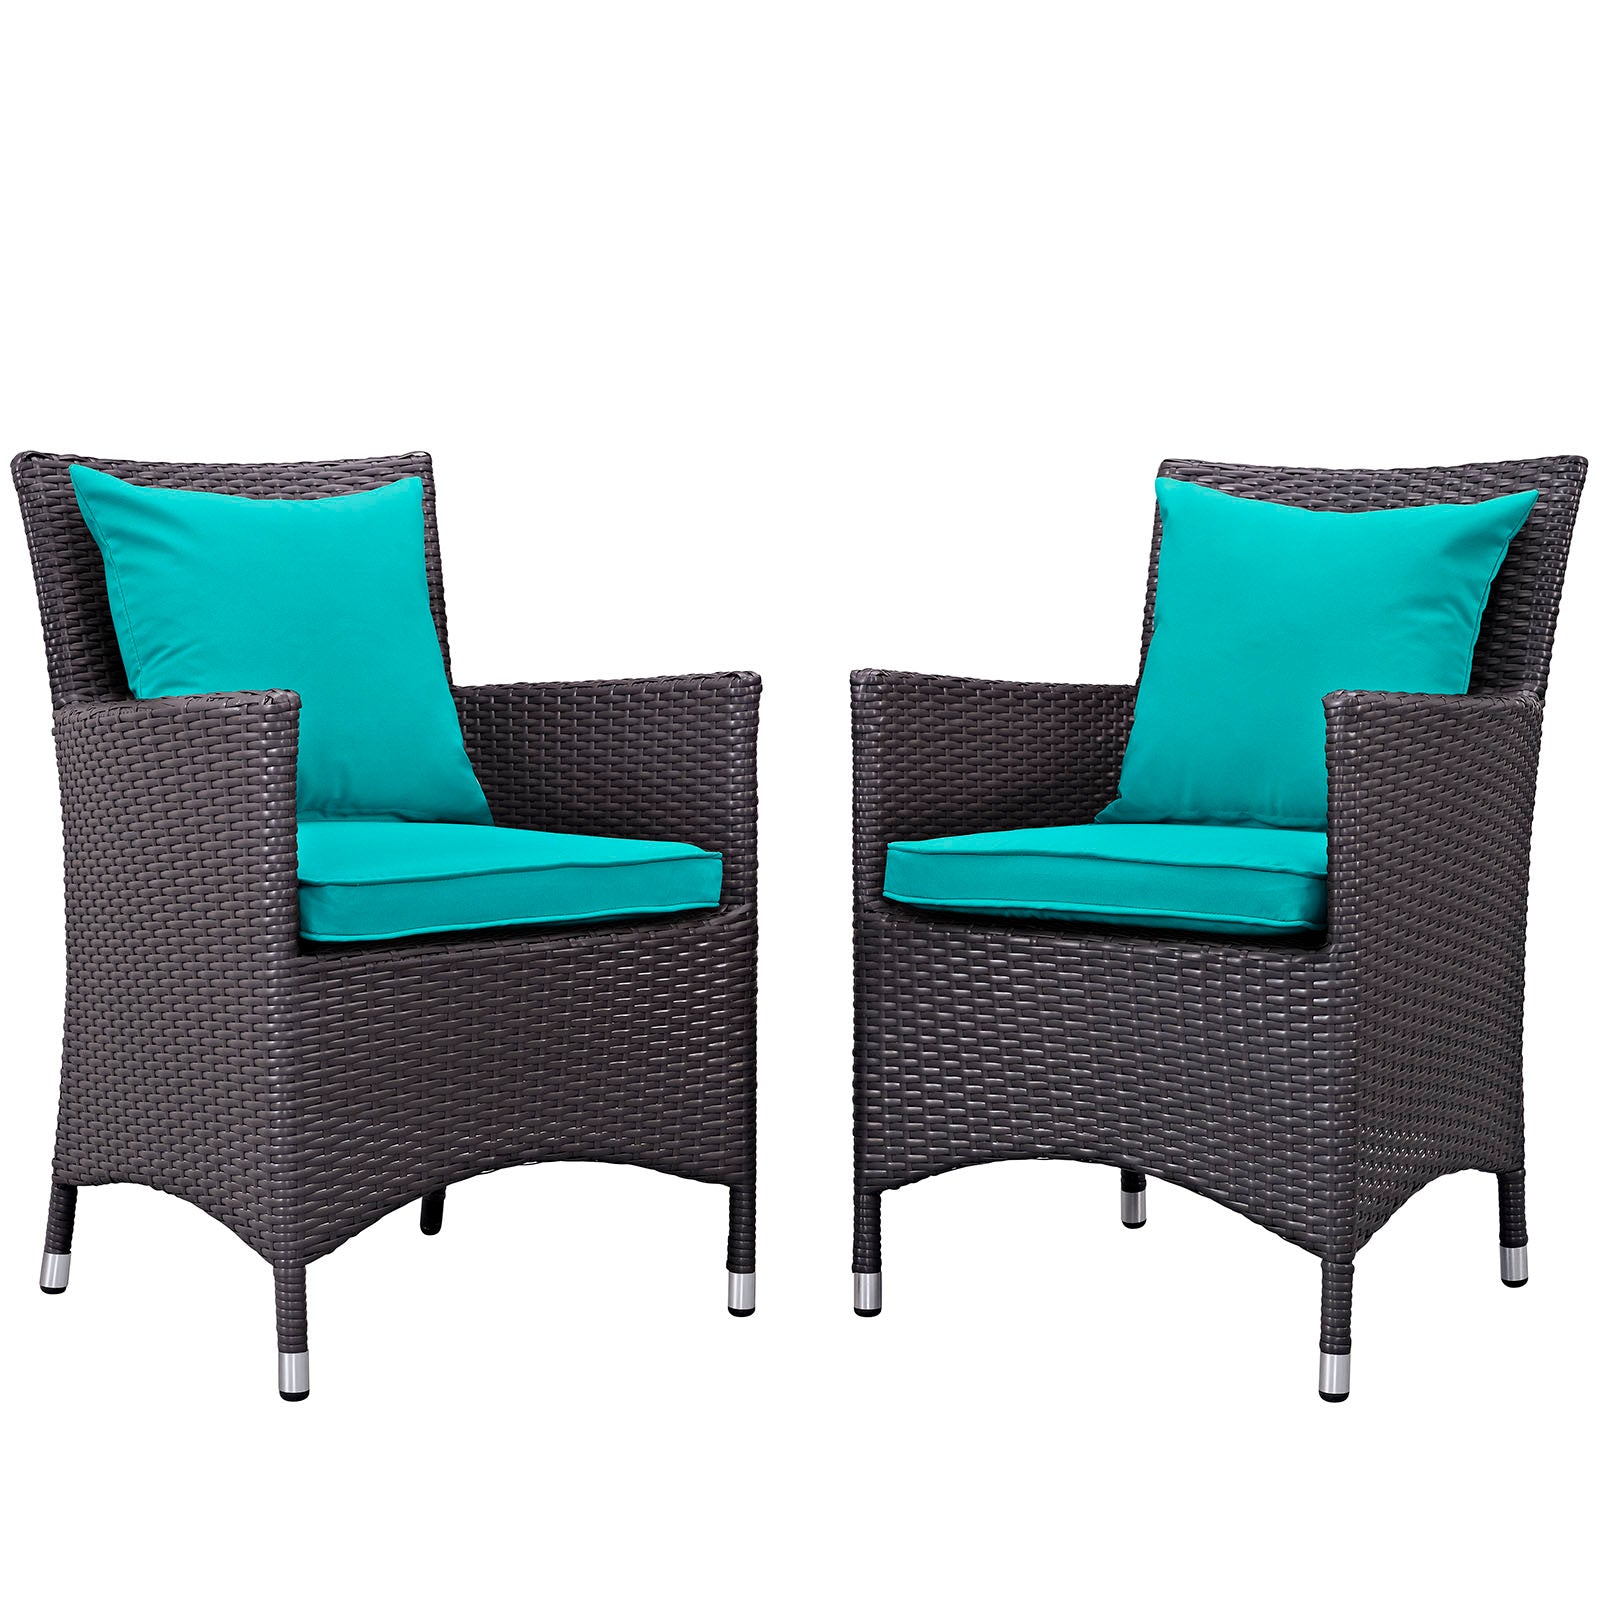 Convene 2 Piece Outdoor Patio Dining Set - East Shore Modern Home Furnishings